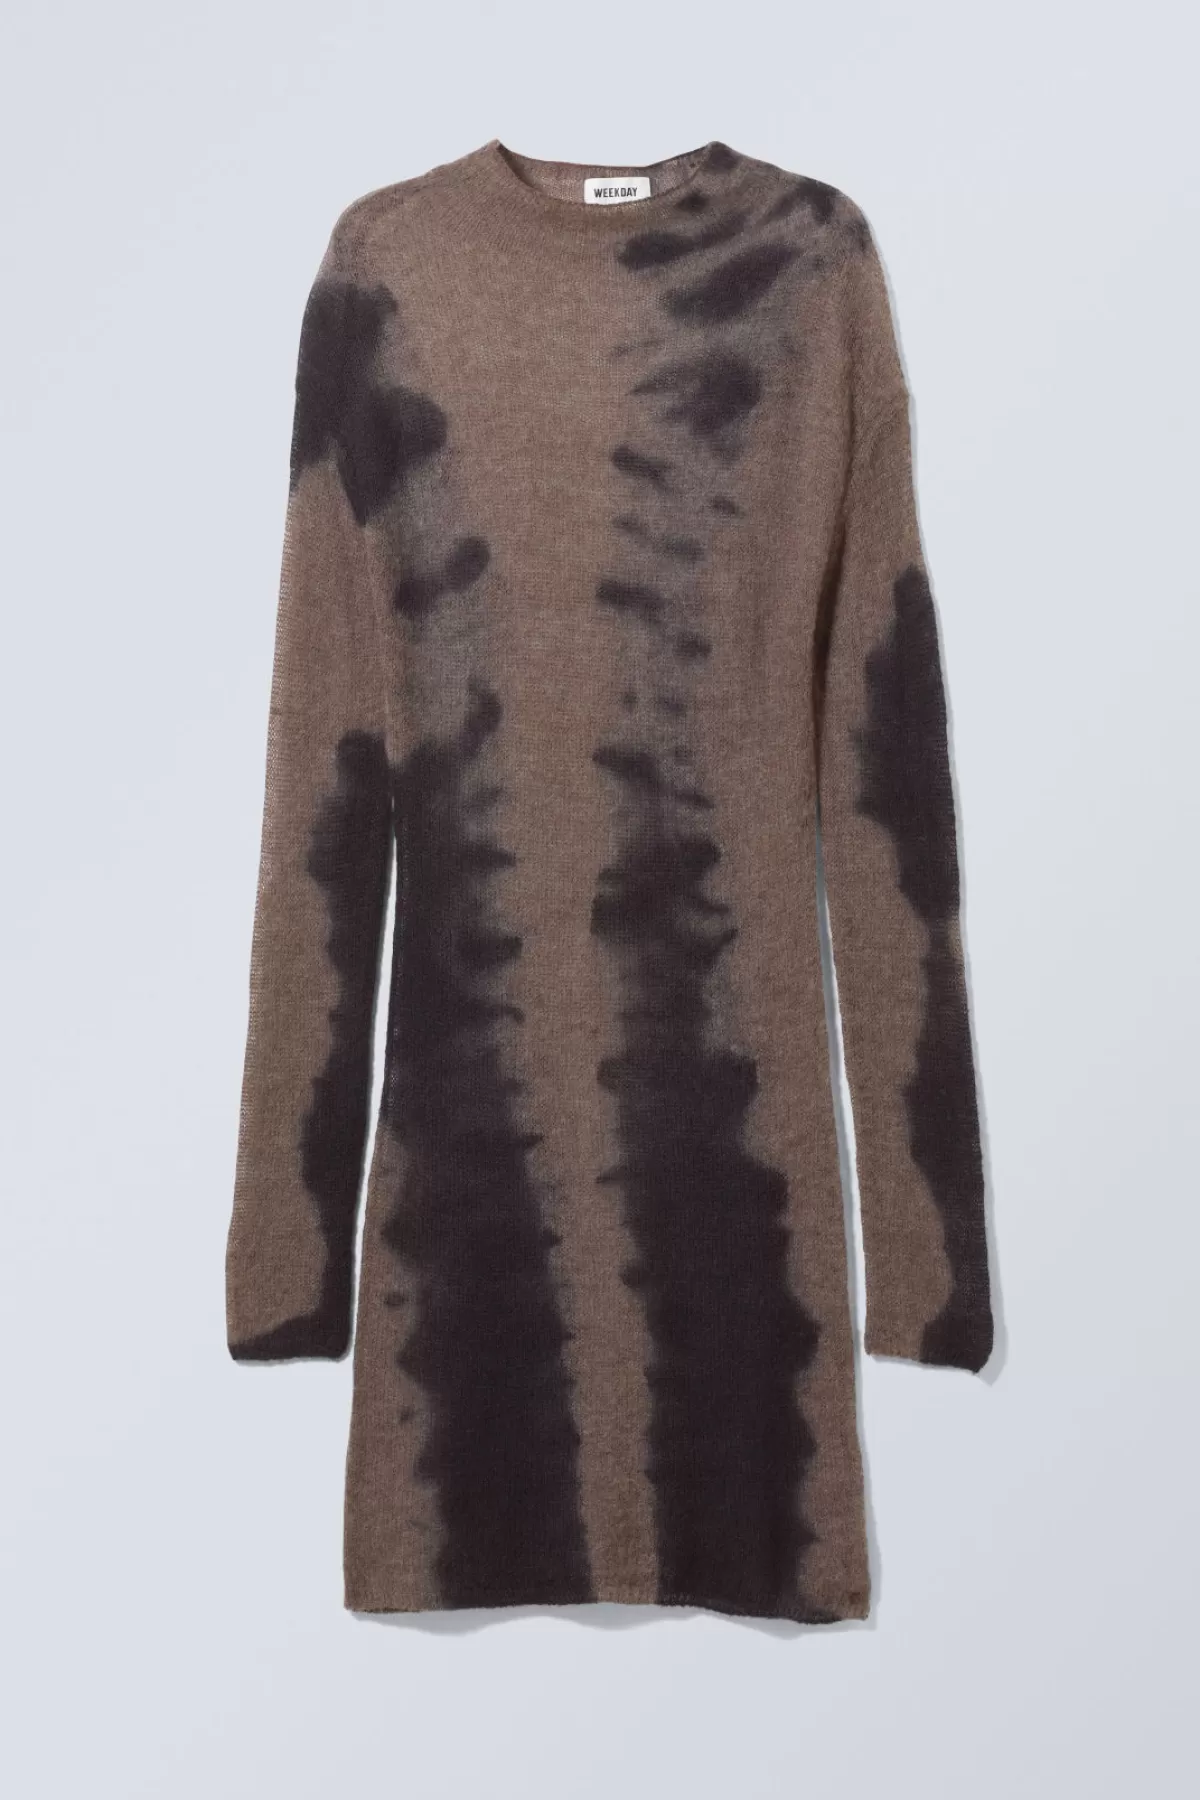 Weekday Tini Knit Dress Brown scale Shop